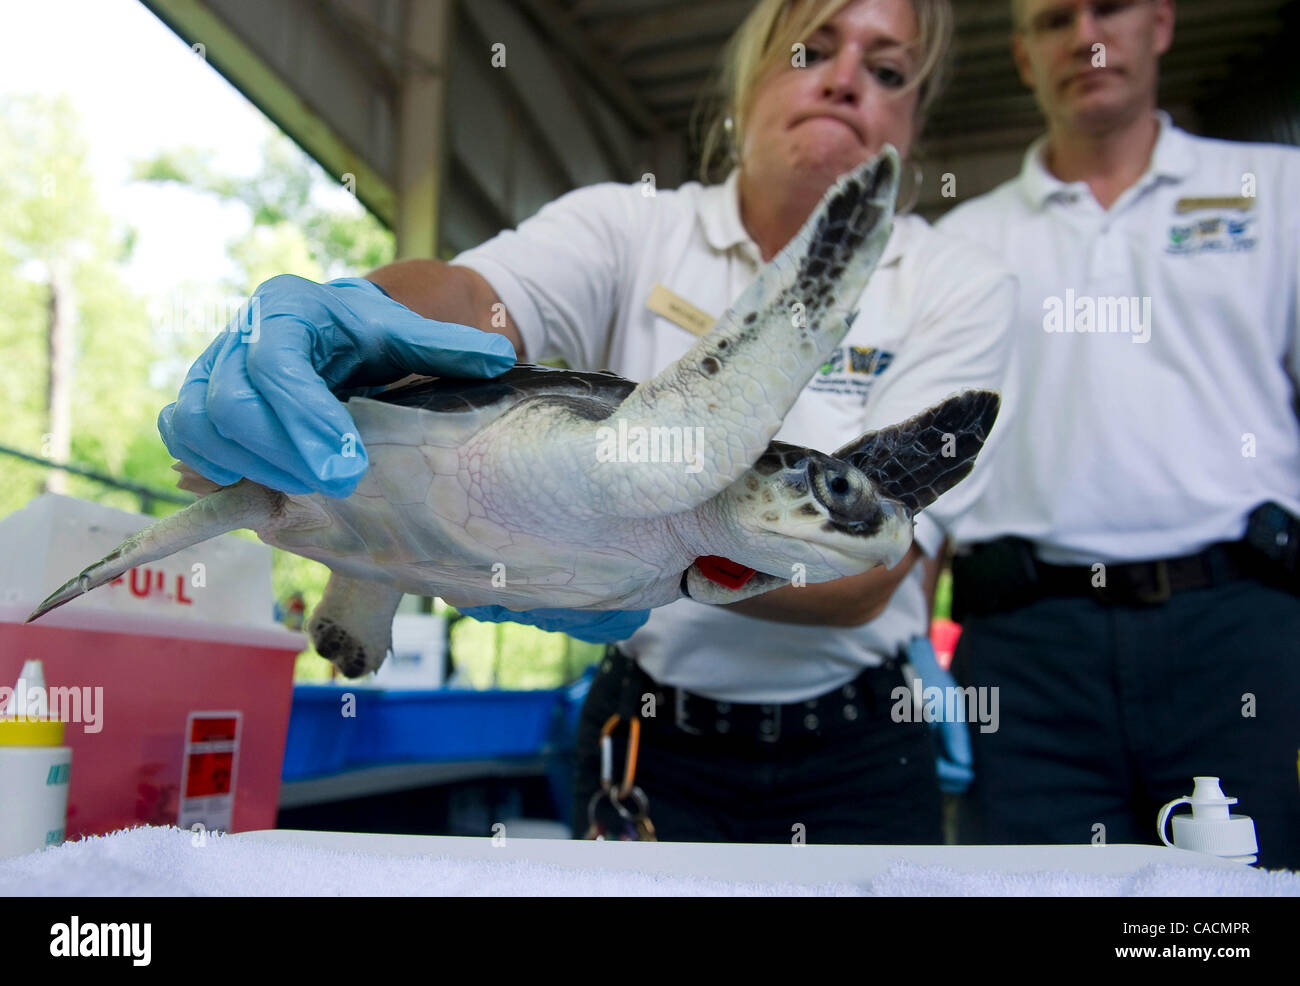 Jun. 10, 2010 - New Orleans, Louisiana, US - An endangered Kemps Ridley sea turtle, which was rescued after being found coated with oil from the Deepwater Horizon oil spill, is treated at the Audubon Nature InstituteÃ•s Center for Research of Endangered Species in New Orleans. Since the start of the Stock Photo